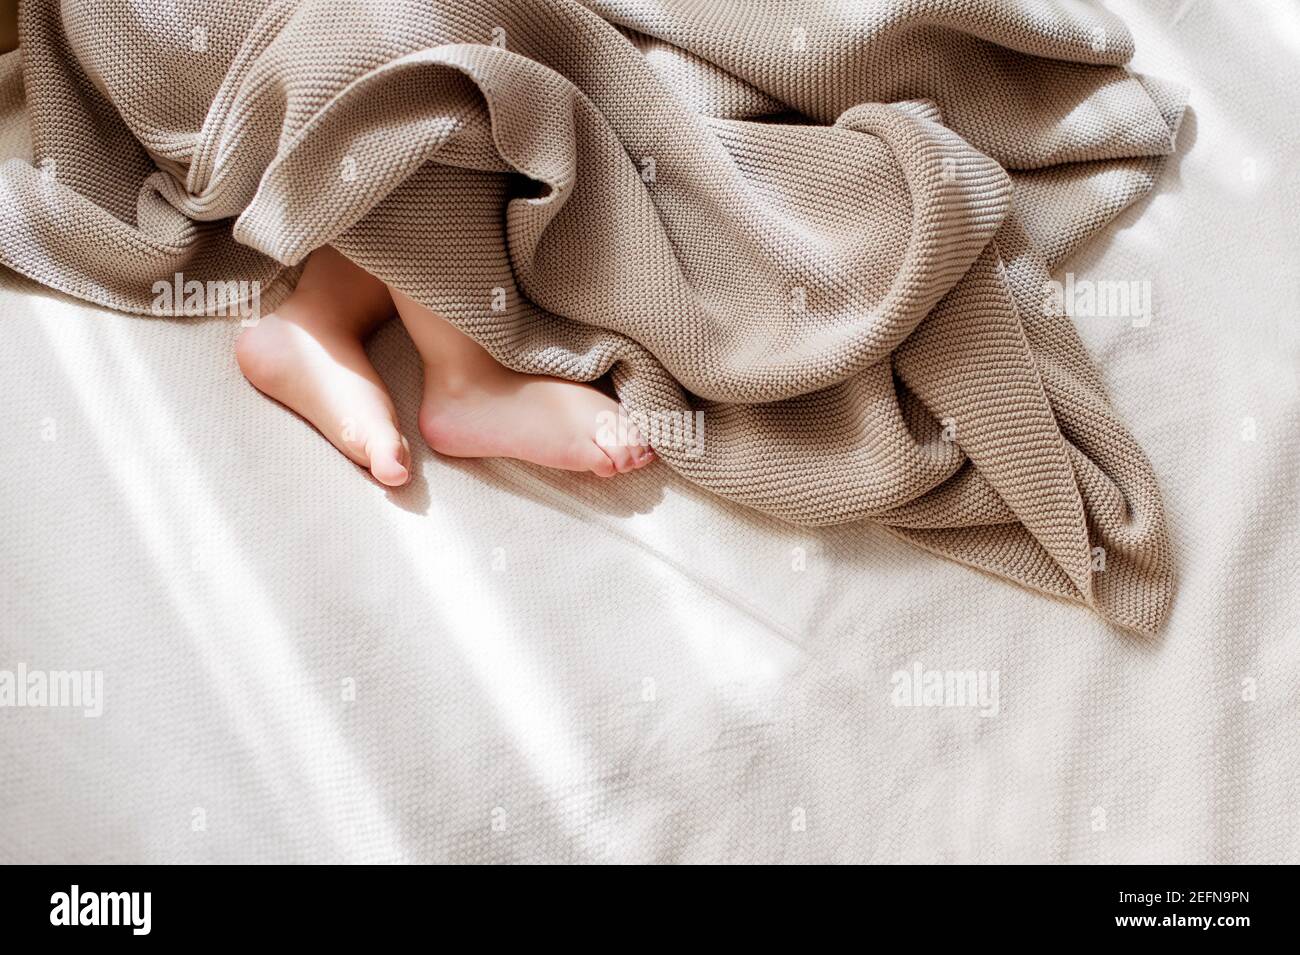 Baby little feet covered with lightweight cotton baby knit blanket Stock Photo